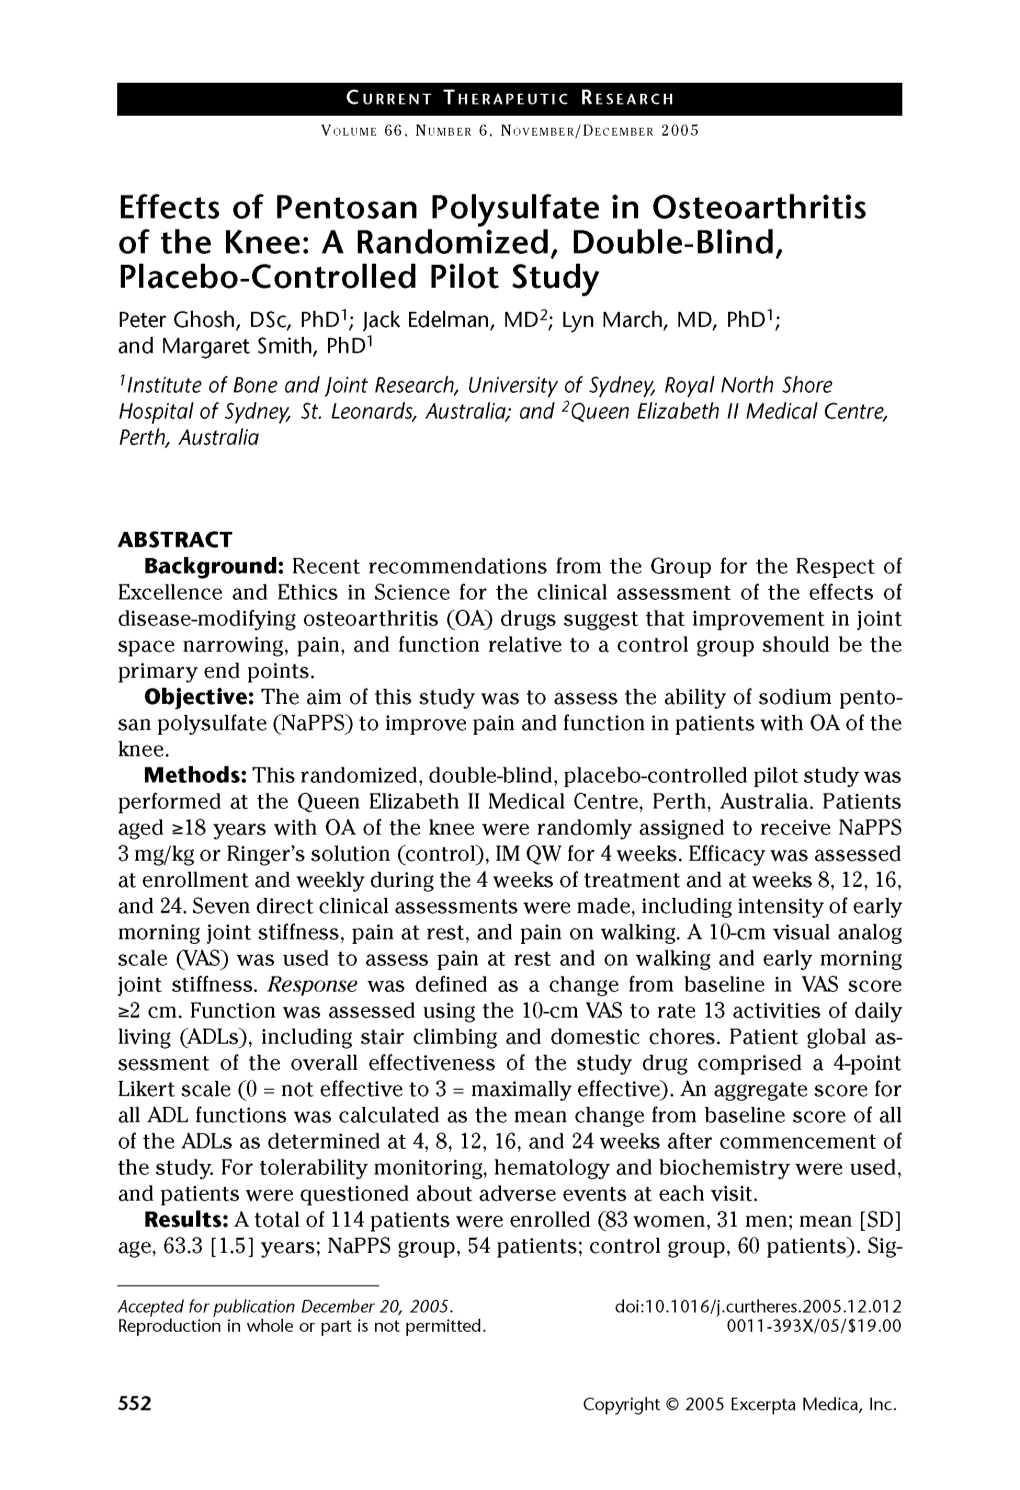 Effects of Pentosan Polysulfate in Osteoarthritis of the Knee: a Randomized, Double-Blind, Placebo-Controlled Pilot Study